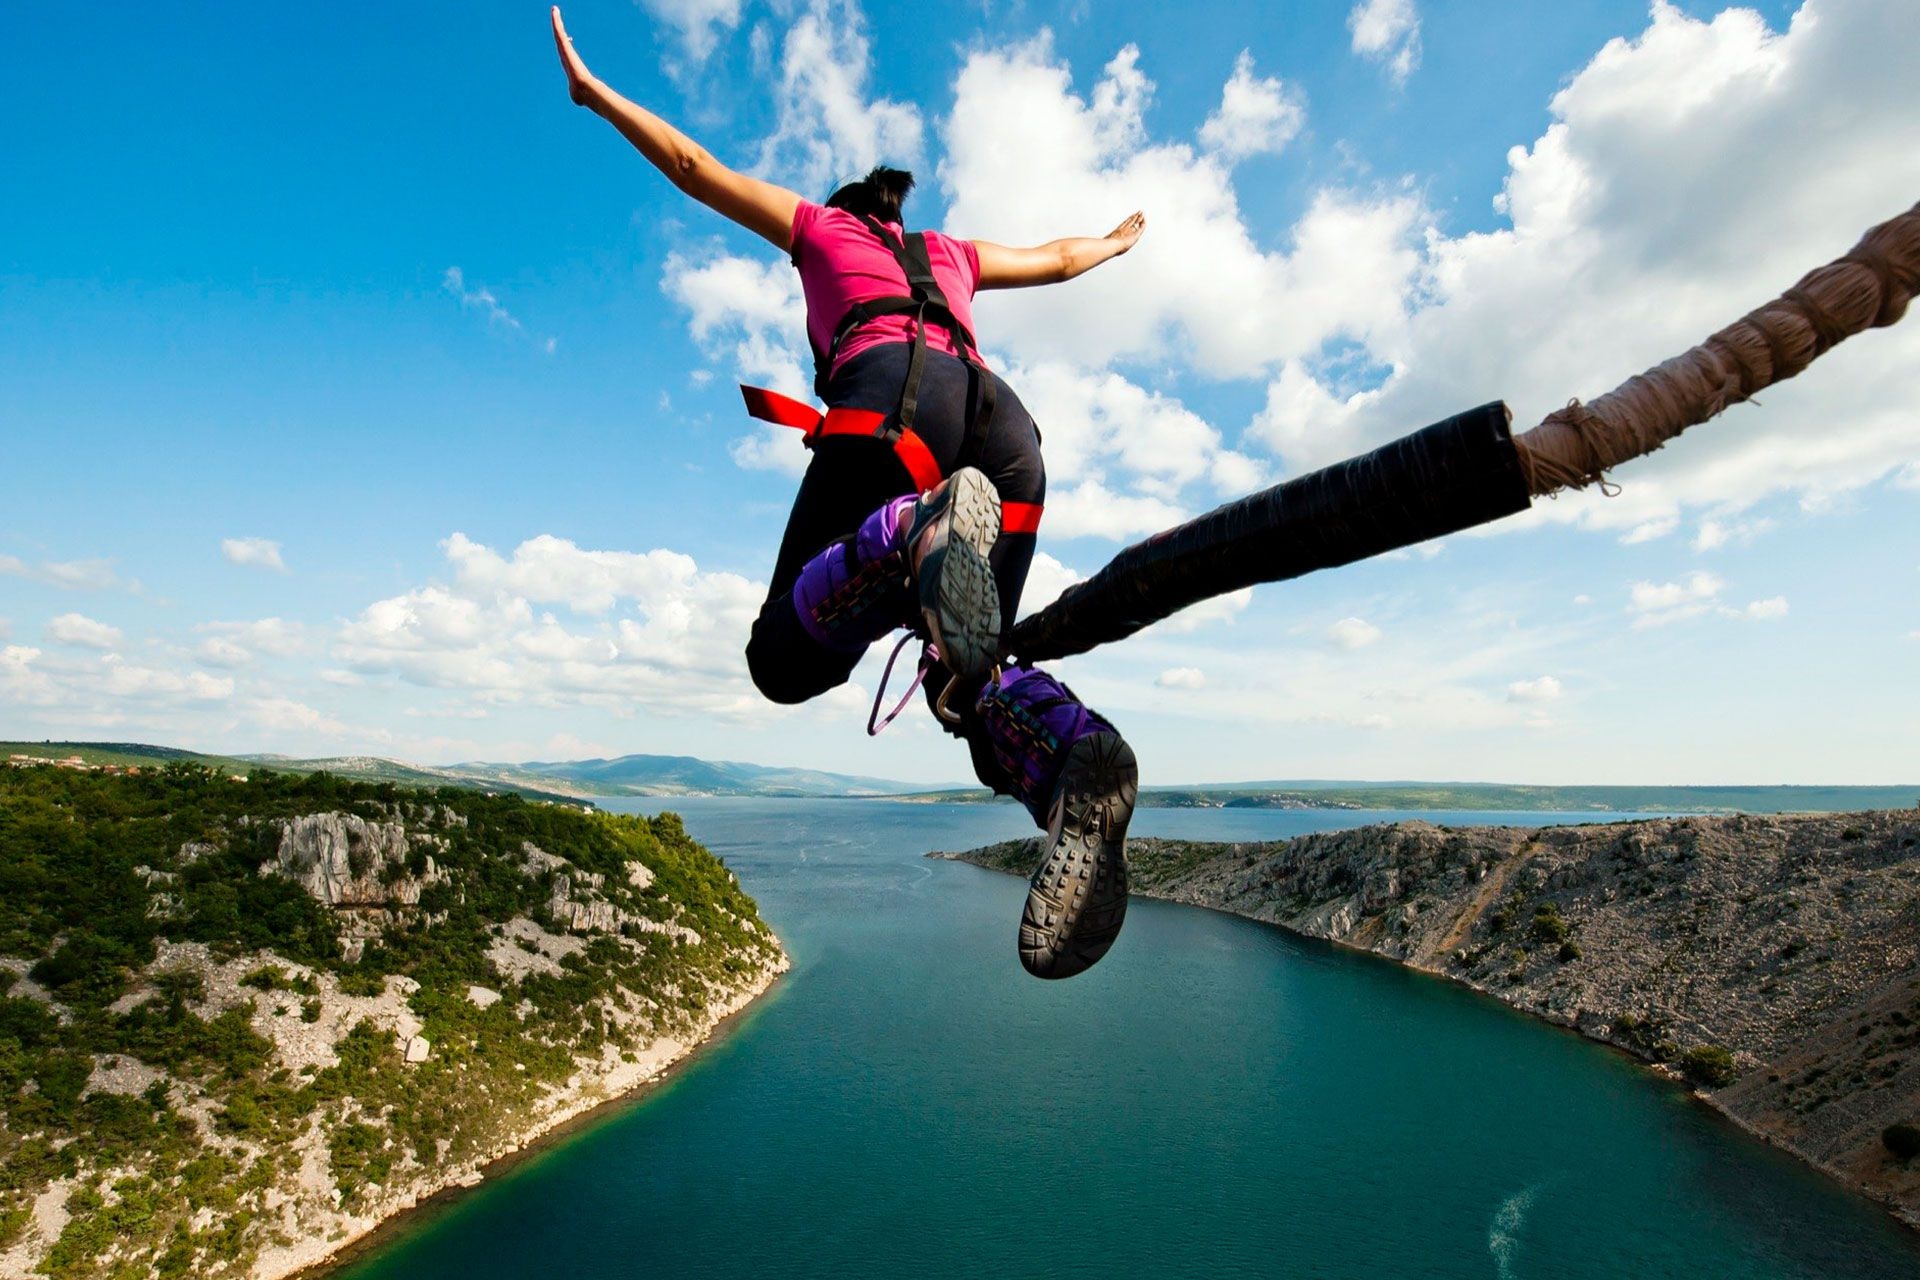 Bungee Jumping: An extreme activity at Maslenica bridge in Croatia, A thrilling adventure. 1920x1280 HD Background.